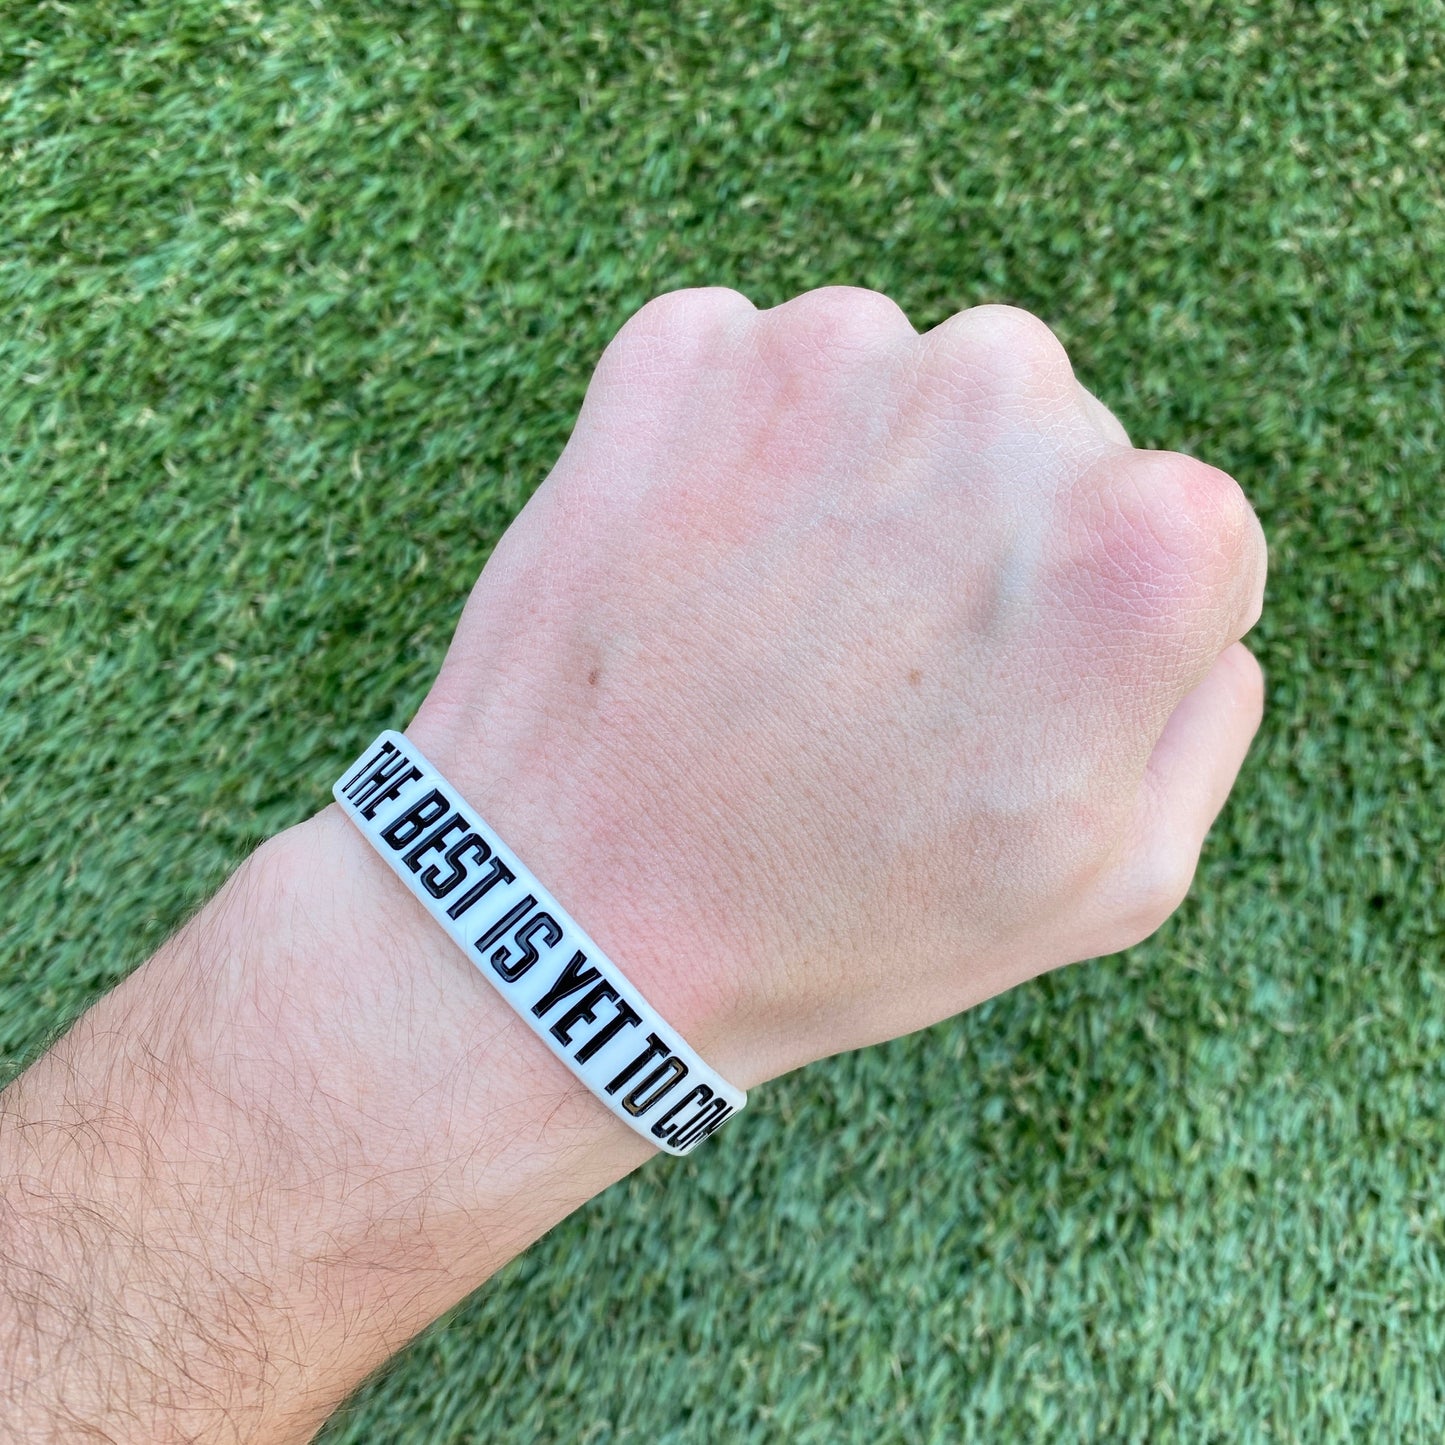 THE BEST IS YET TO COME Wristband - Southern Grace Creations